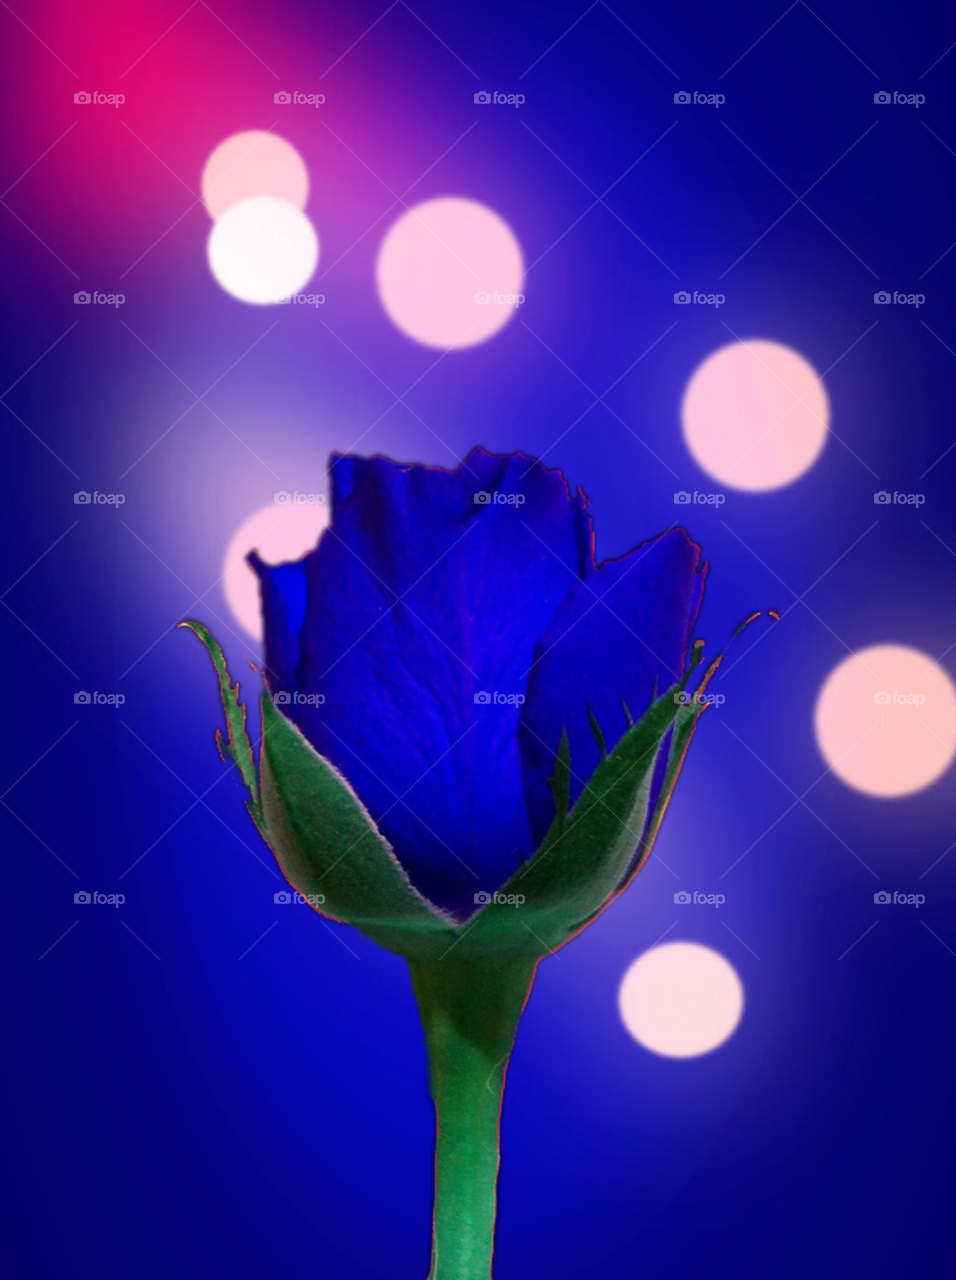 flower blue background color by upyanose